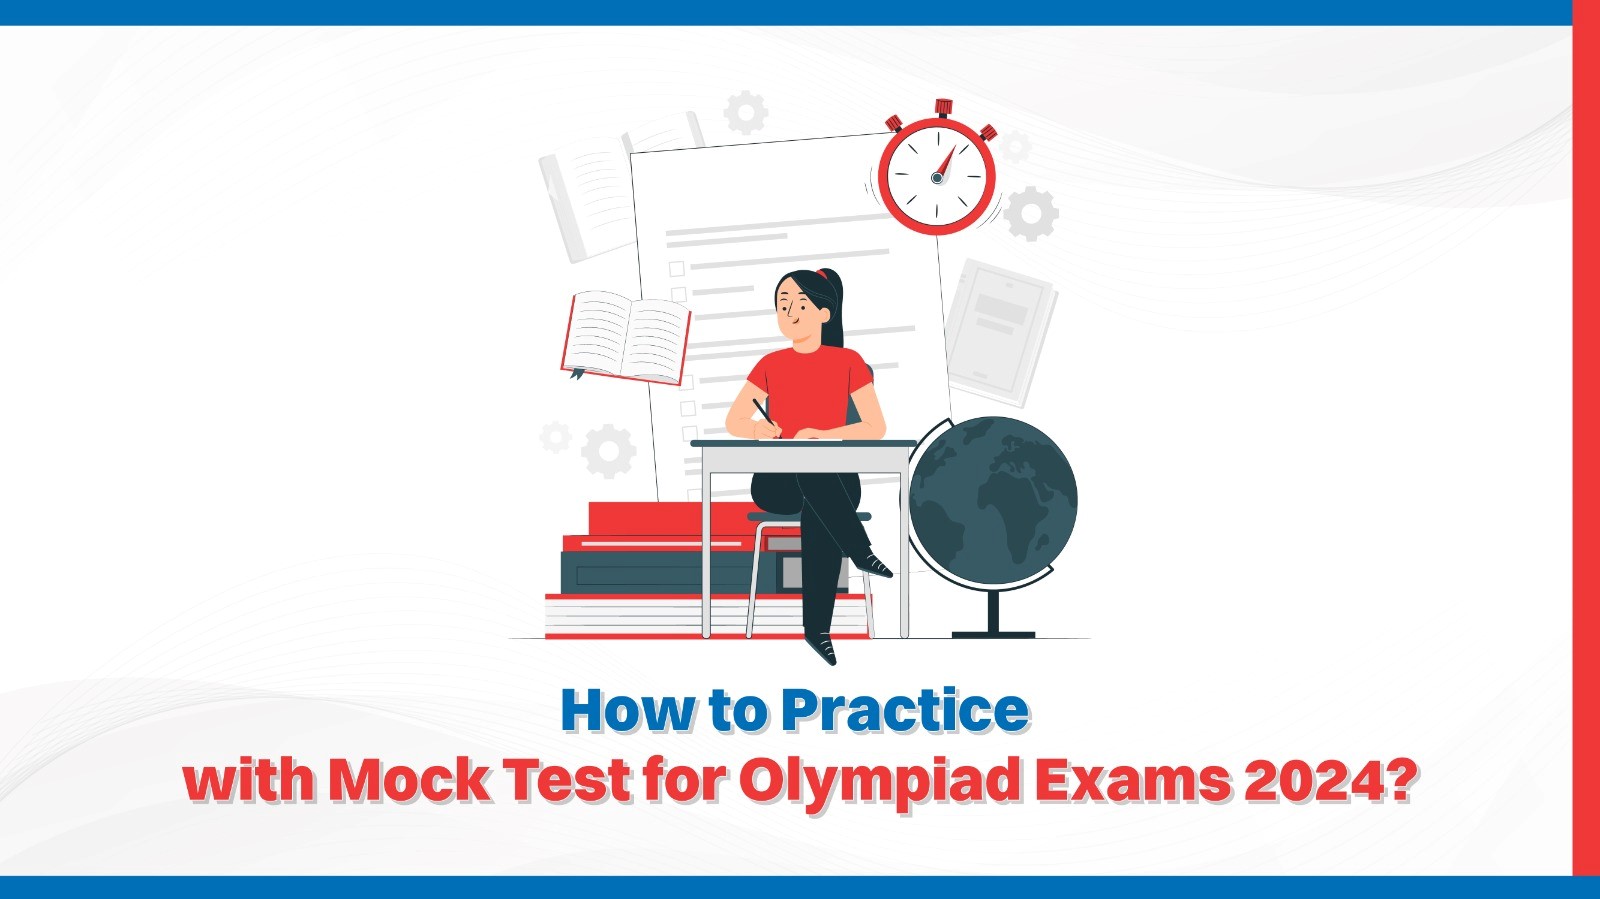 How to Practice with Mock Test for Olympiad Exams 2024?